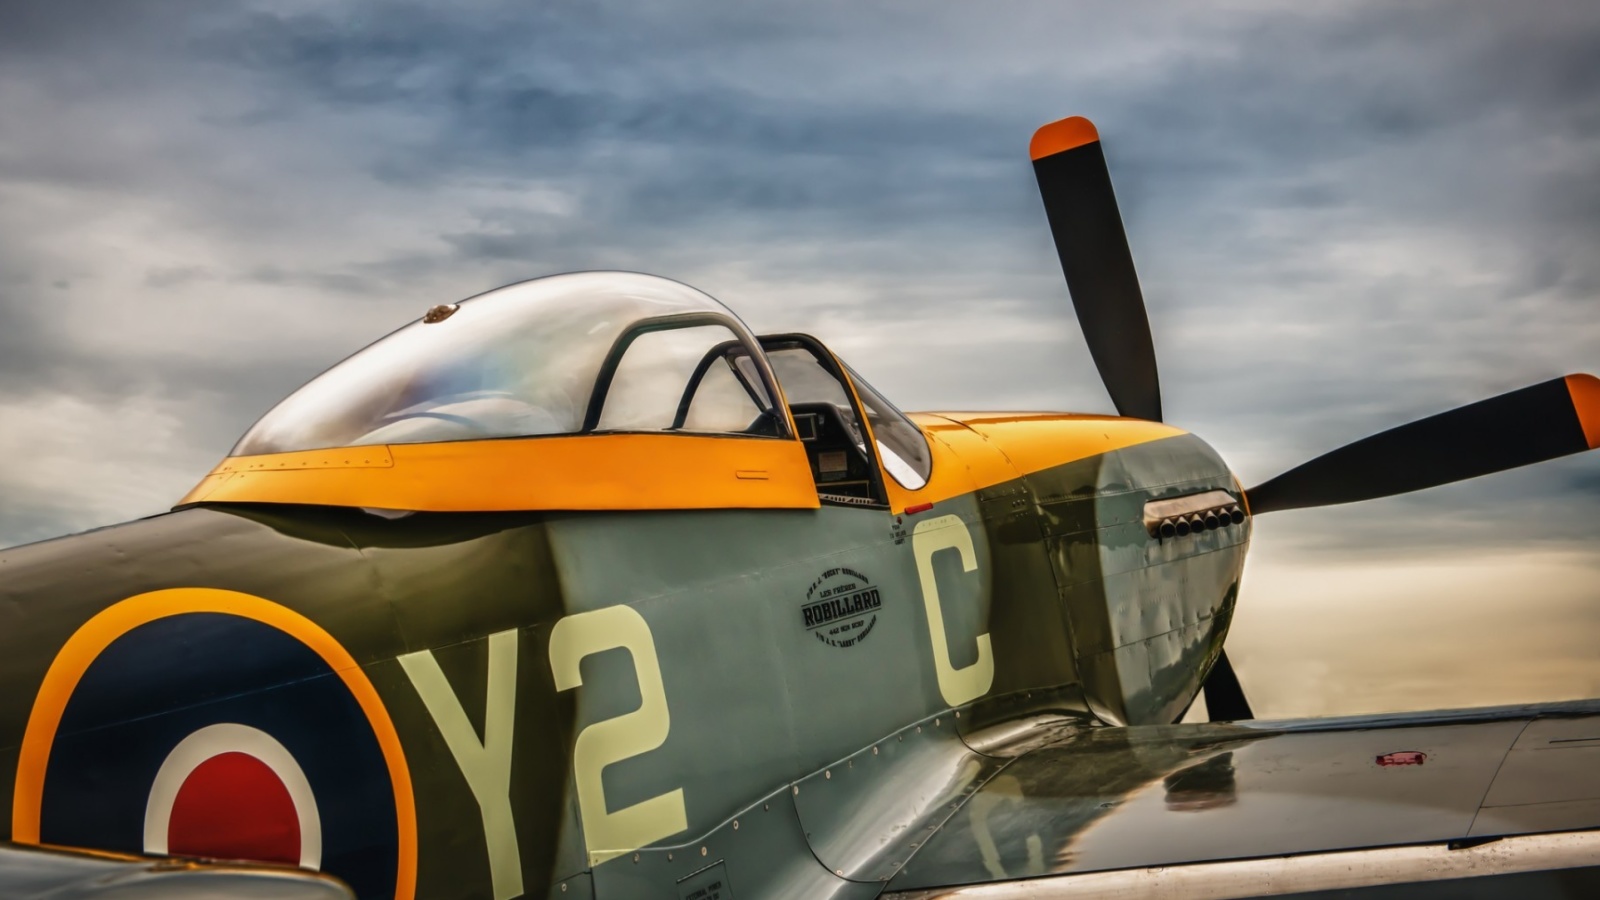 North American P 51 Mustang Air Fighter in World War 2 wallpaper 1600x900